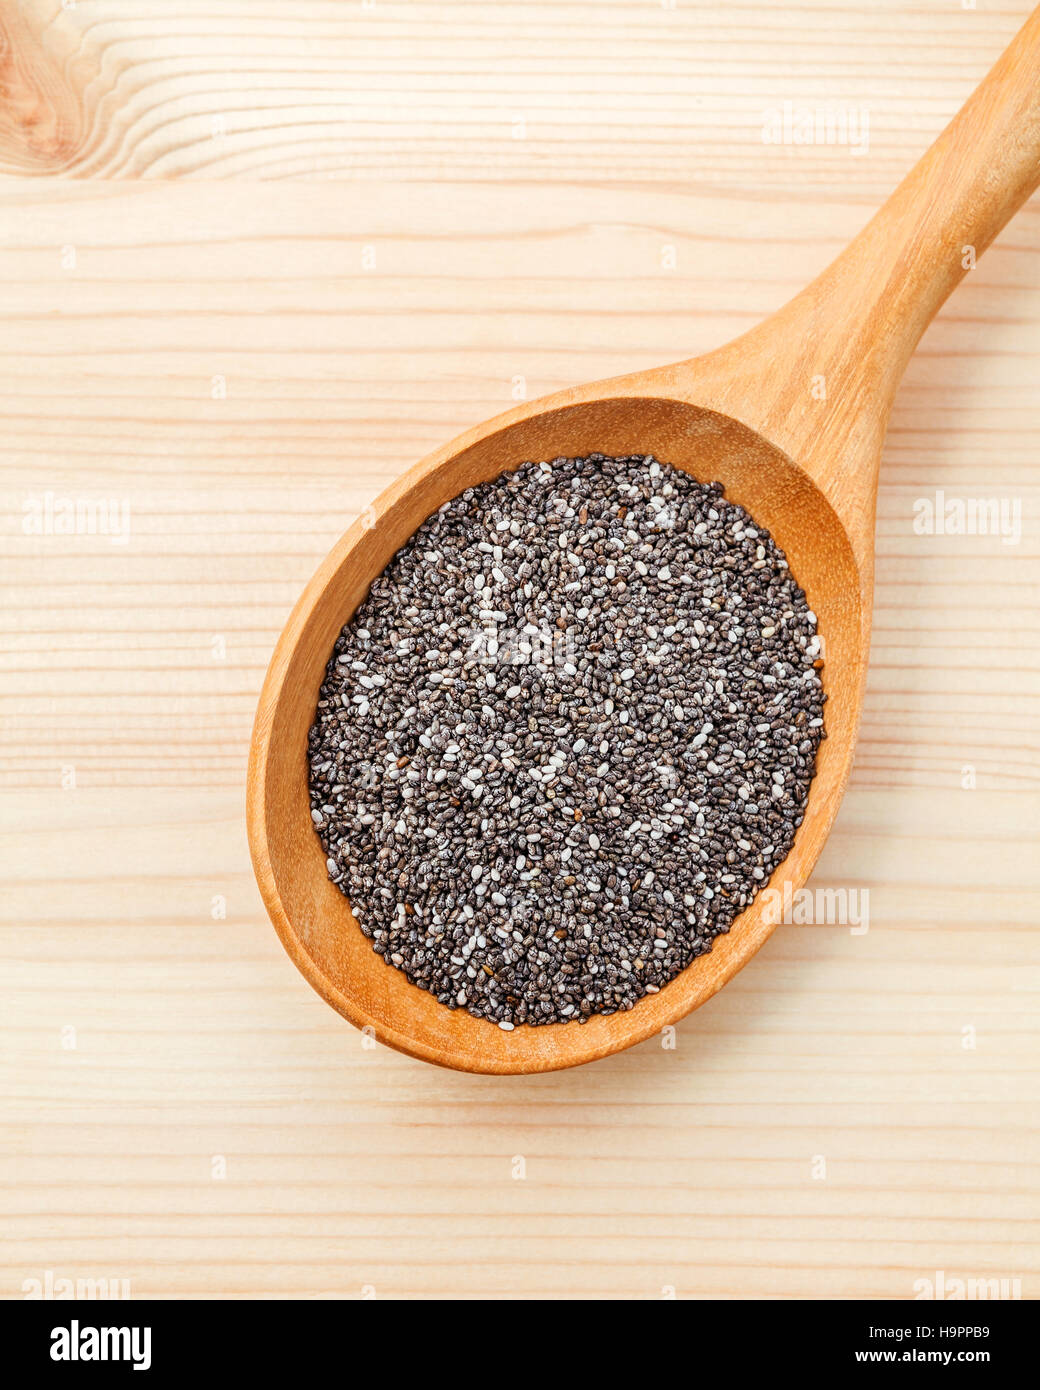 Nutritious chia seeds in wooden spoon for diet food ingredients Stock Photo